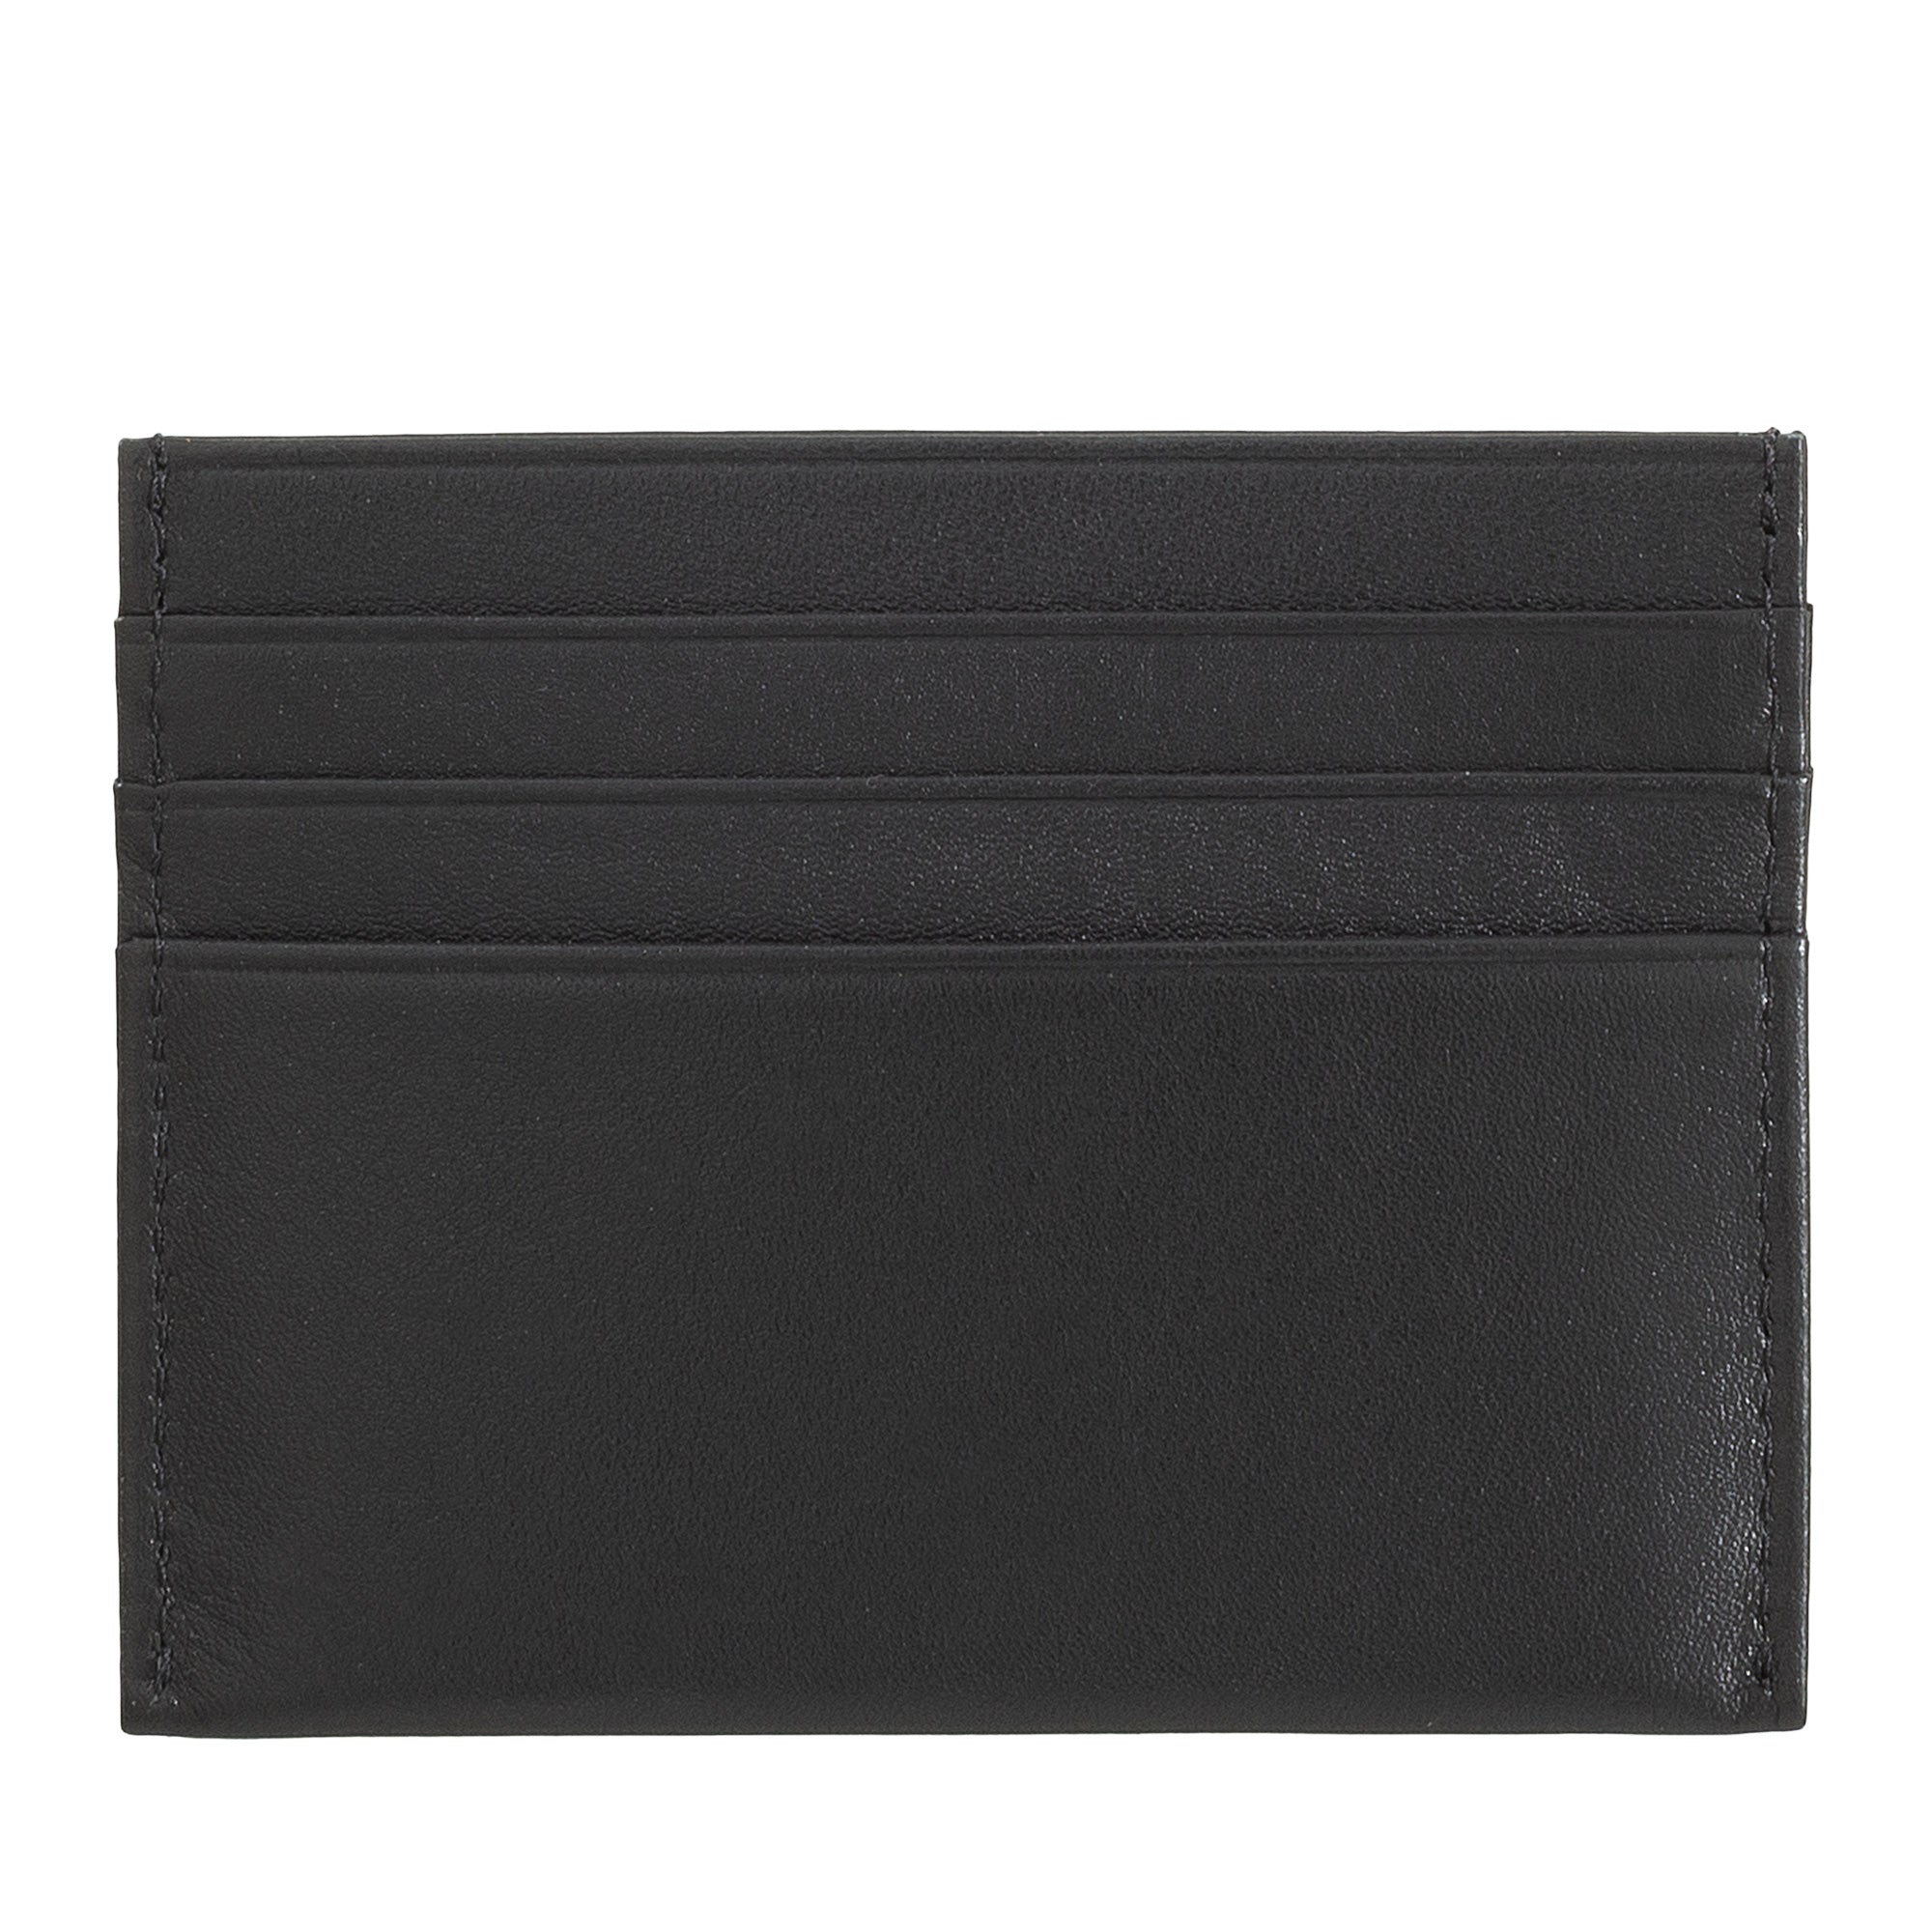 Nuvola Pelle Nappa Leather Card Holder Melvin - Artisia Store